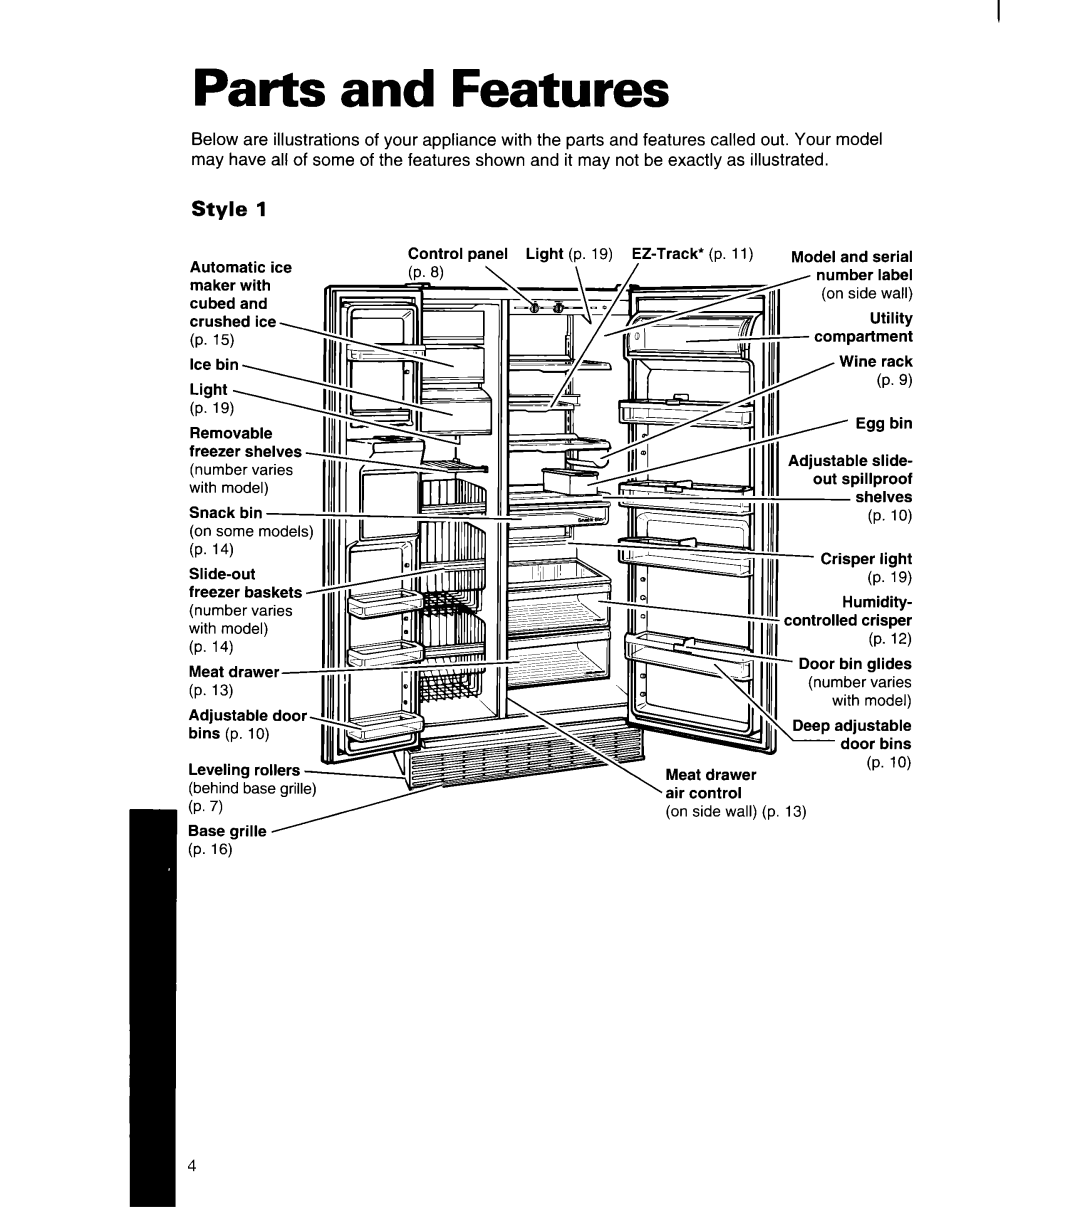 Whirlpool 4YED27DQDN00 manual Parts and Features, 11111, IIIll11, Style 